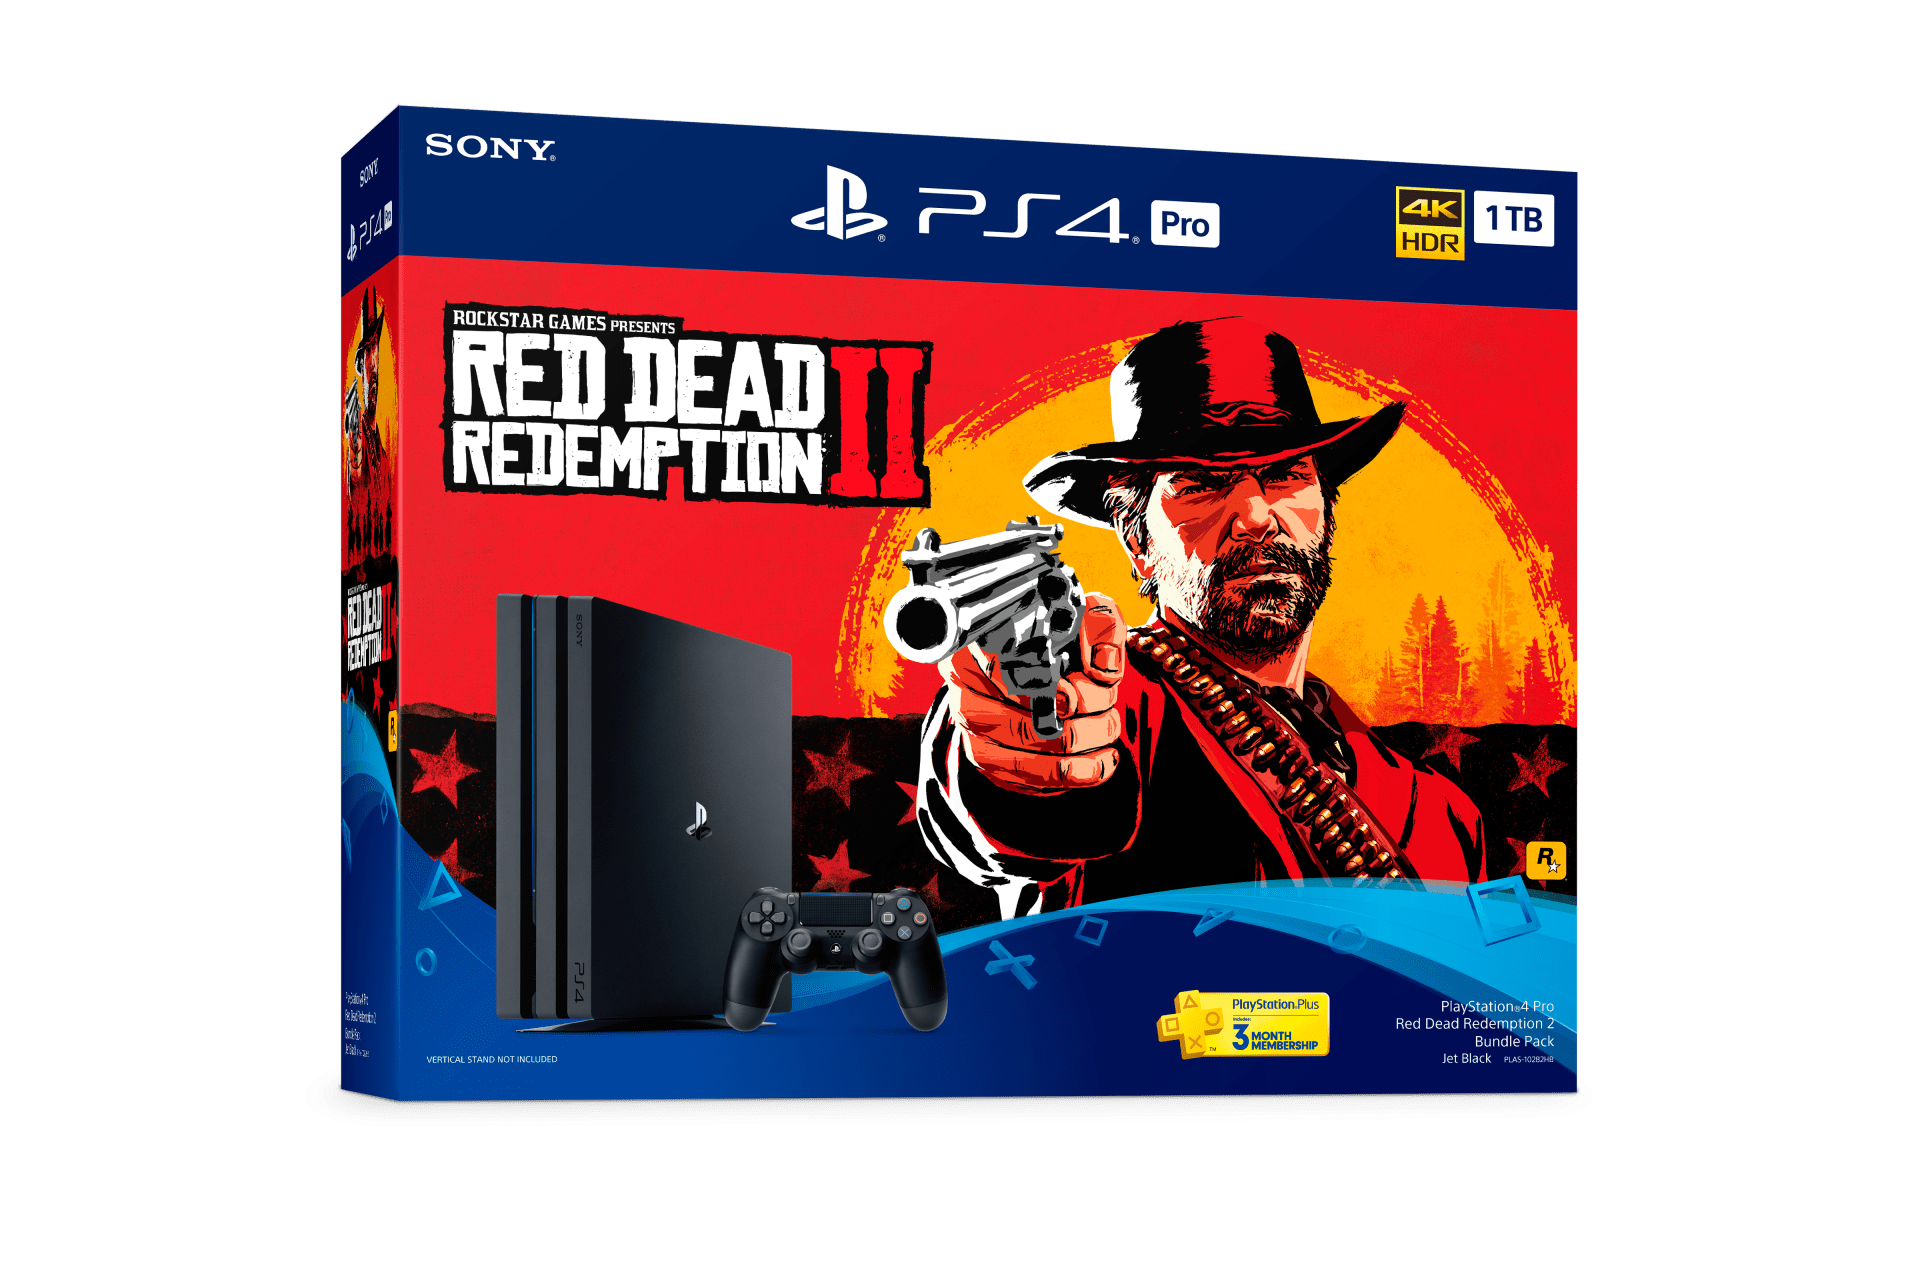 Sony PLAYSTATION 4 Pro 1tb rdr2. Ред дед редемпшн на ps4. Sony PLAYSTATION 4 Slim Red Dead Redemption 2. Red Dead Redemption 2 PLAYSTATION. Red redemption 1 ps4